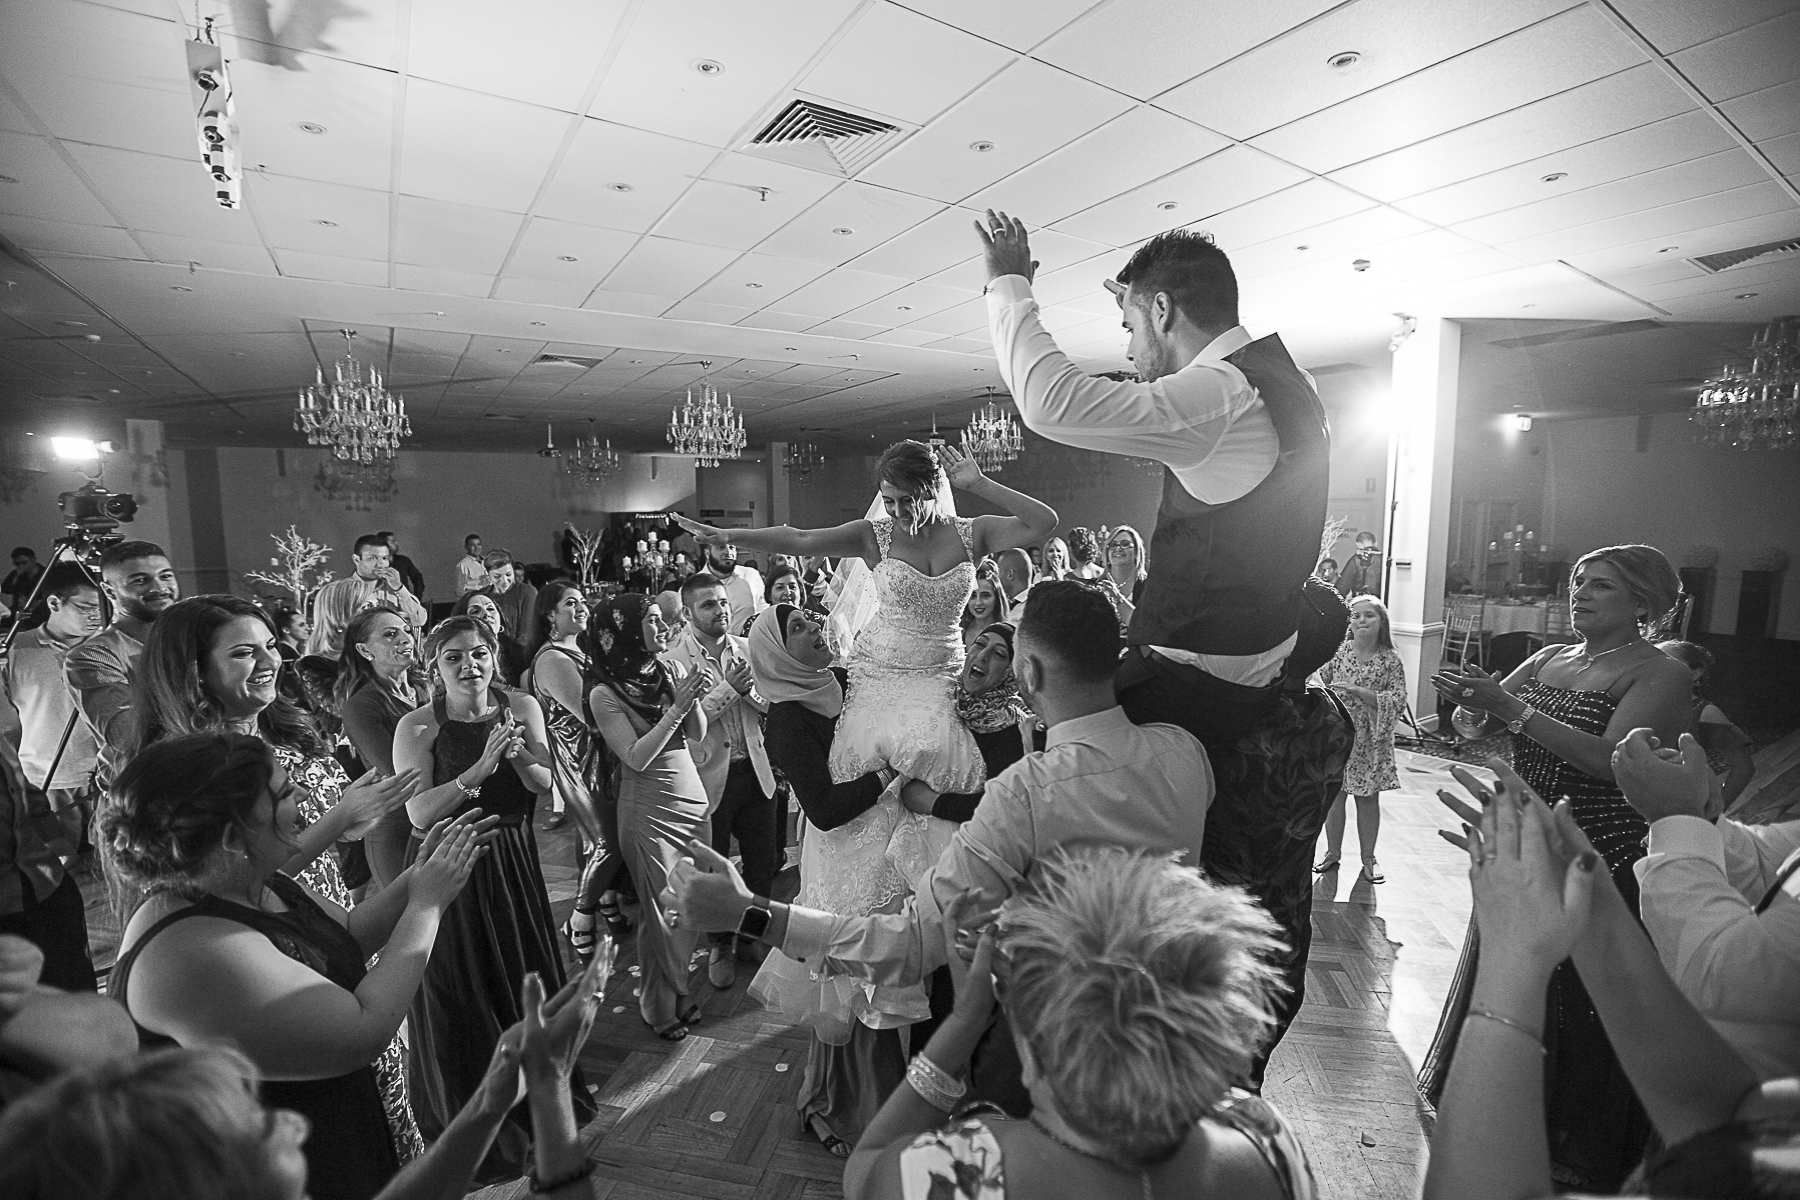 Wedding guests lifted up bride and groom celebrating during the dance on dance floor | Fantasie Photography